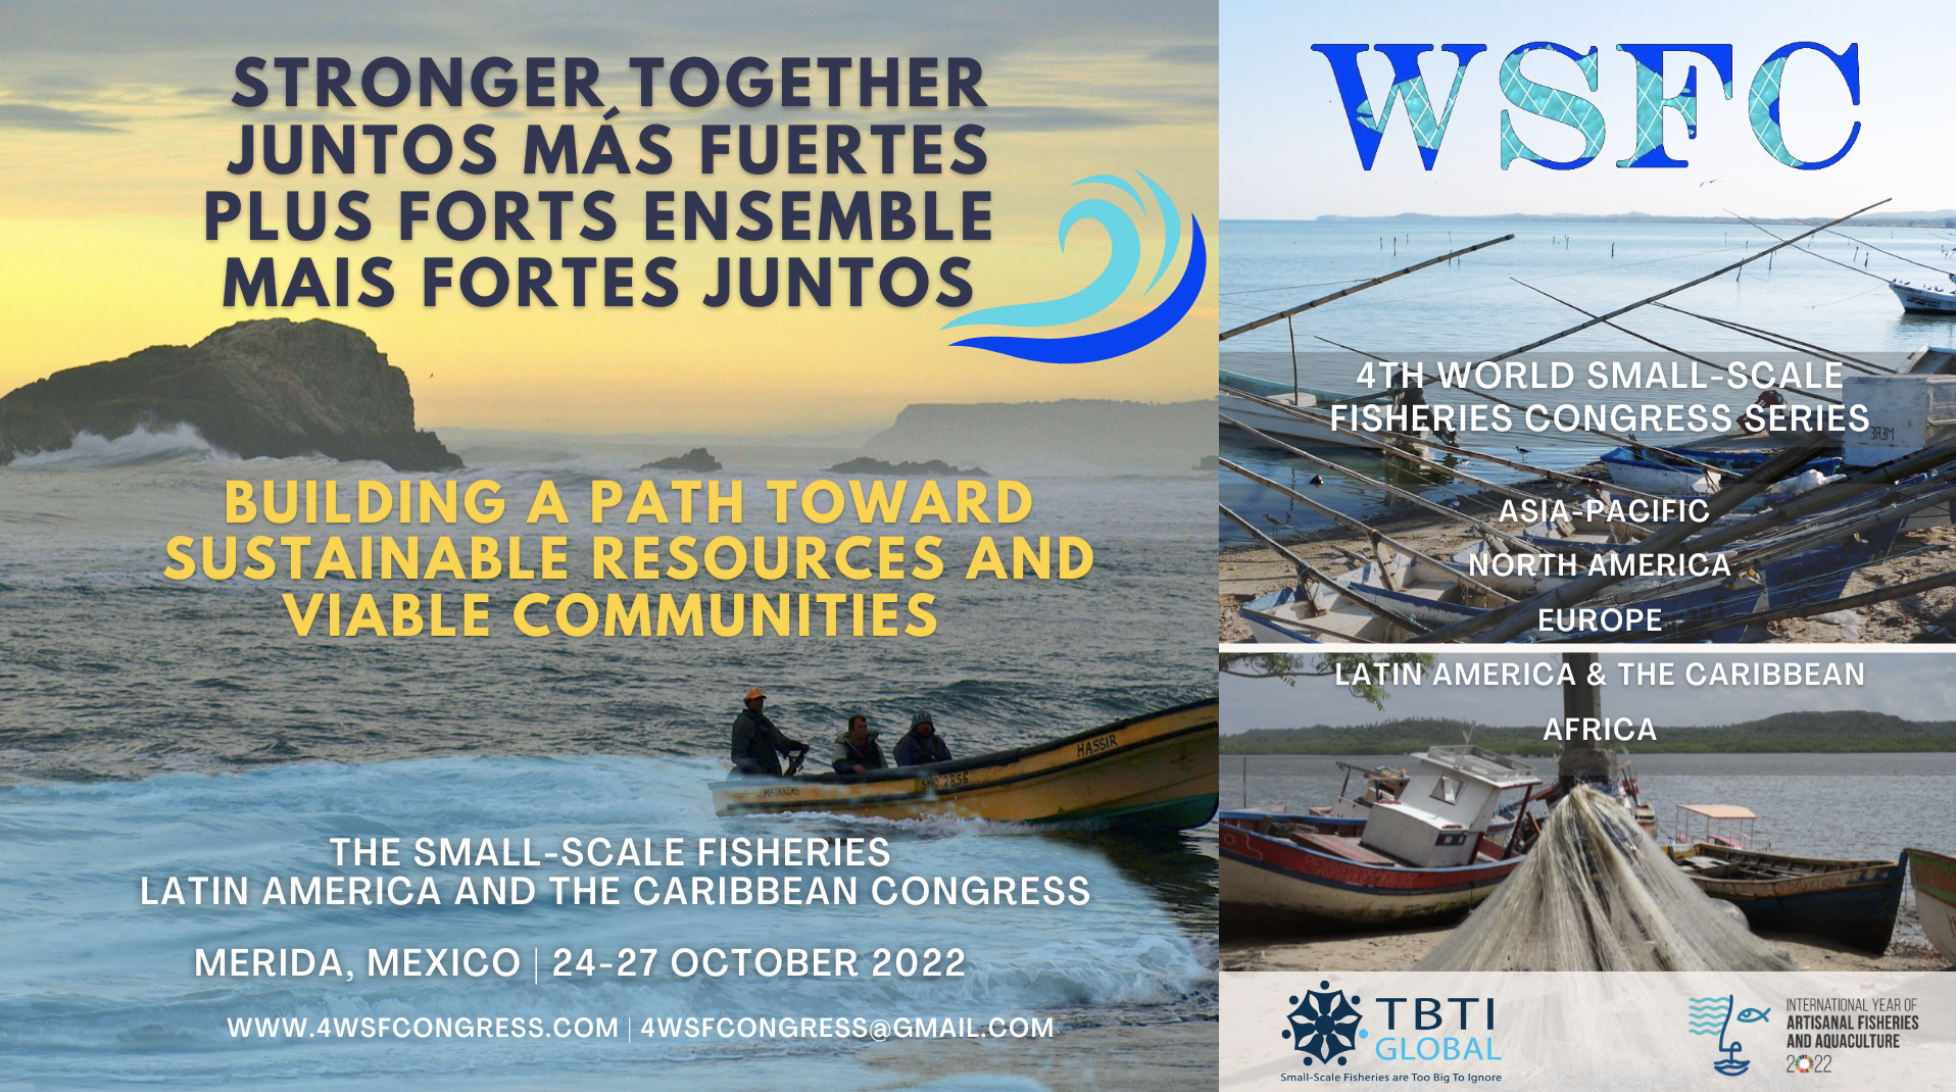 4th World Small-Scale Fisheries Congress (4WSFC) – ECOP Programme